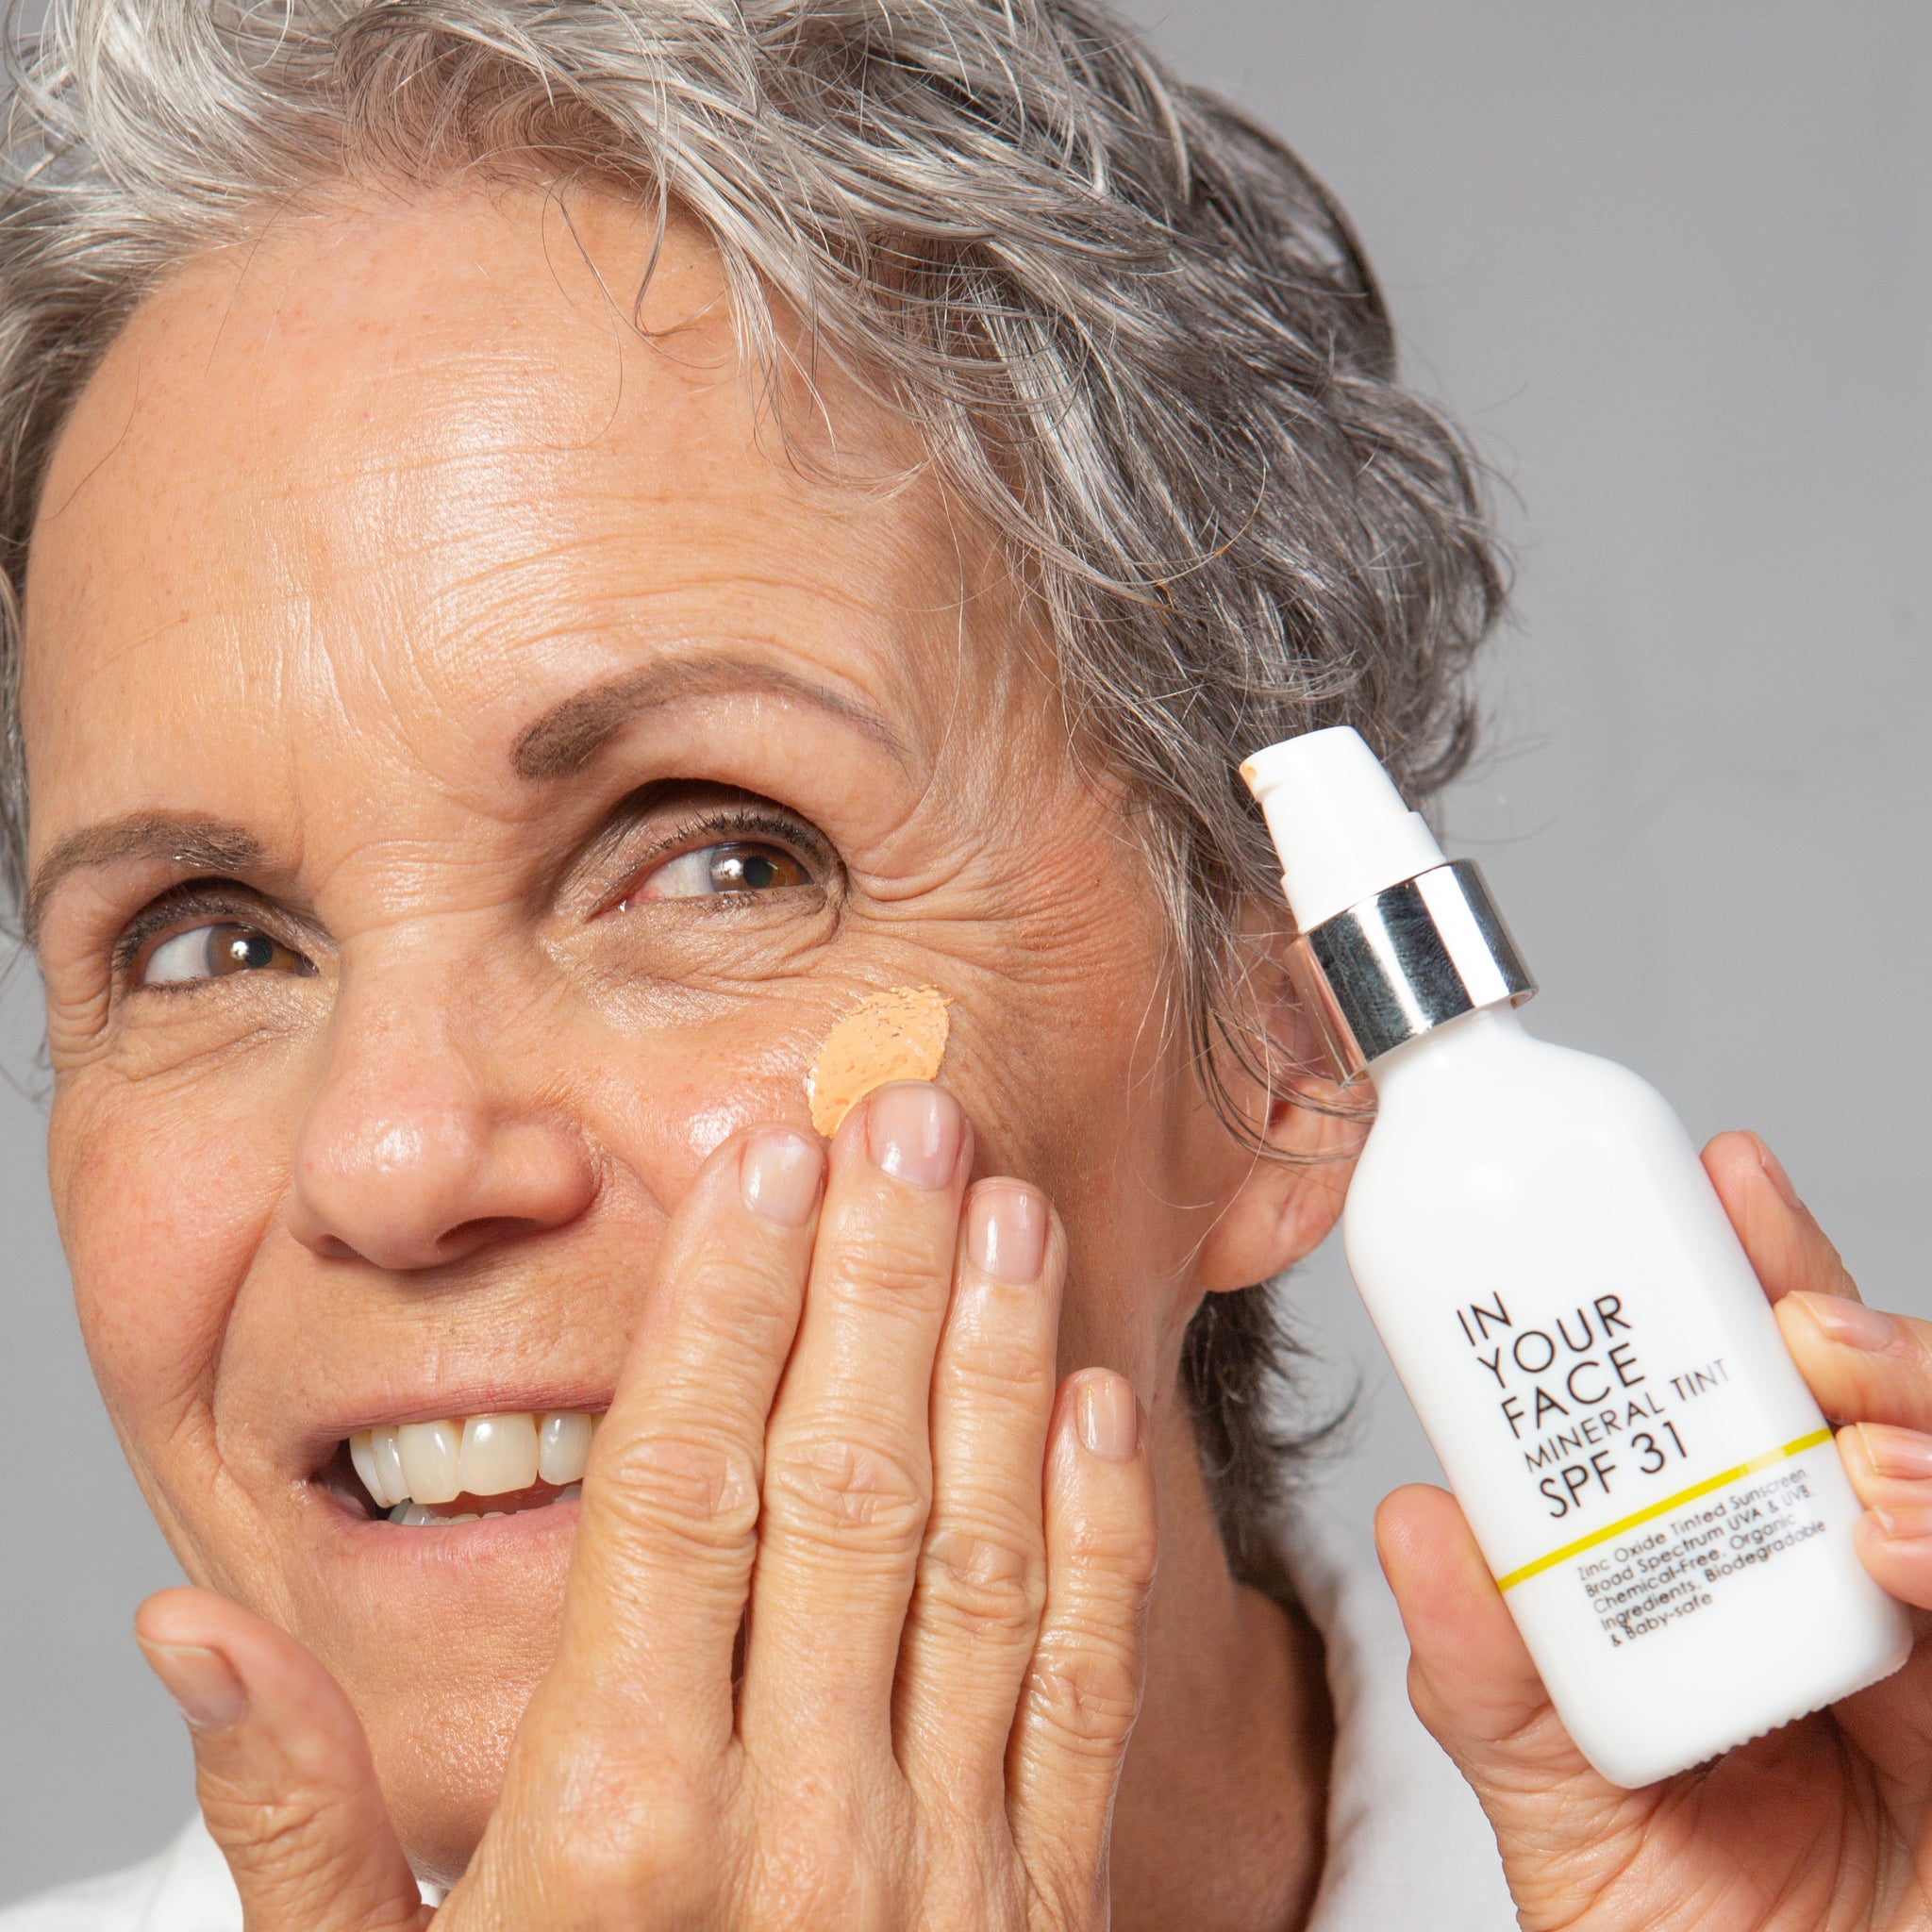 Smiling mature woman applying SPF product to cheek